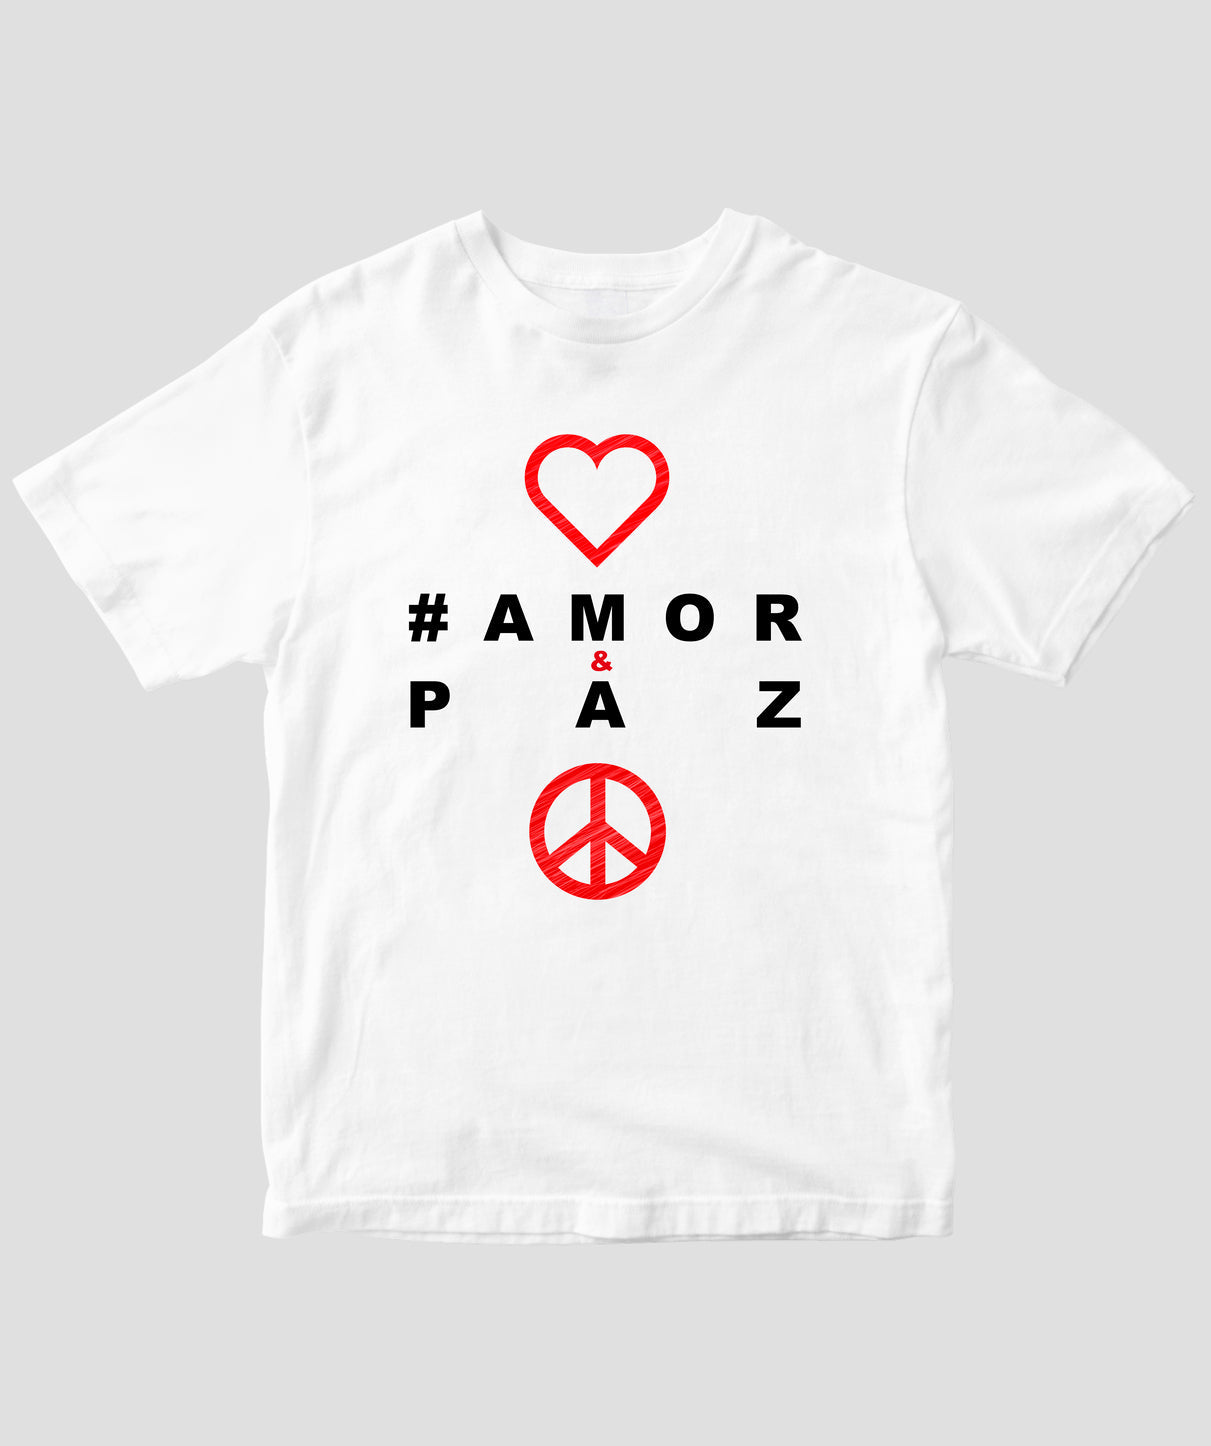 #LOVE AND PEACE ポルトガル語版 Tシャツ Type A / 三修社